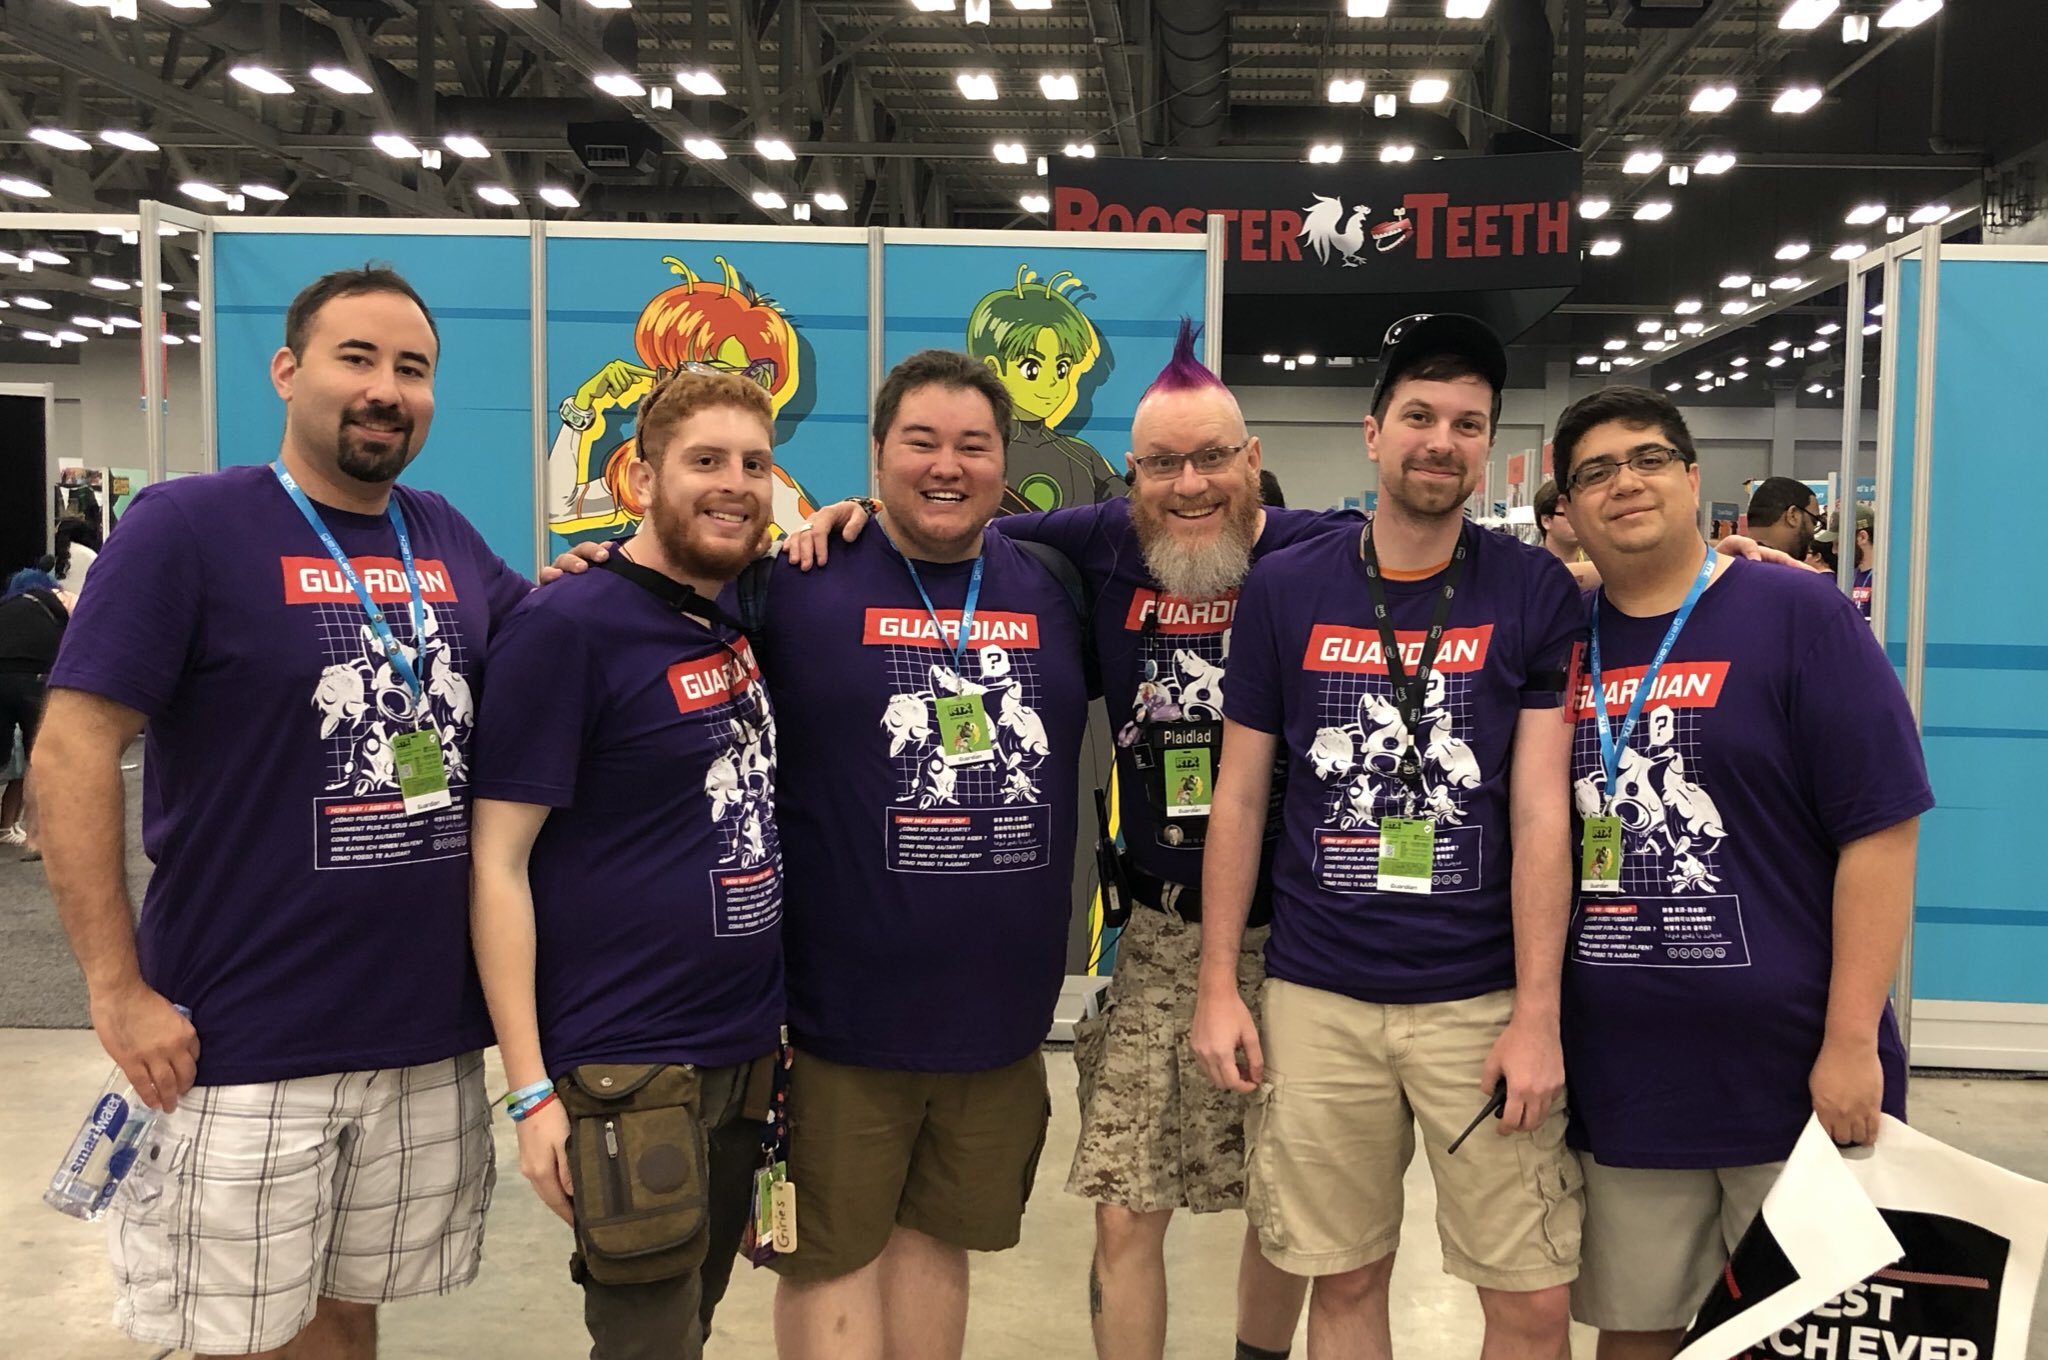 RTX Event on Twitter: "Want to be a Guardian at RTX 2020? Submit your application before time out! https://t.co/bRjrJObyt3 https://t.co/jdGcfAKenQ" / Twitter